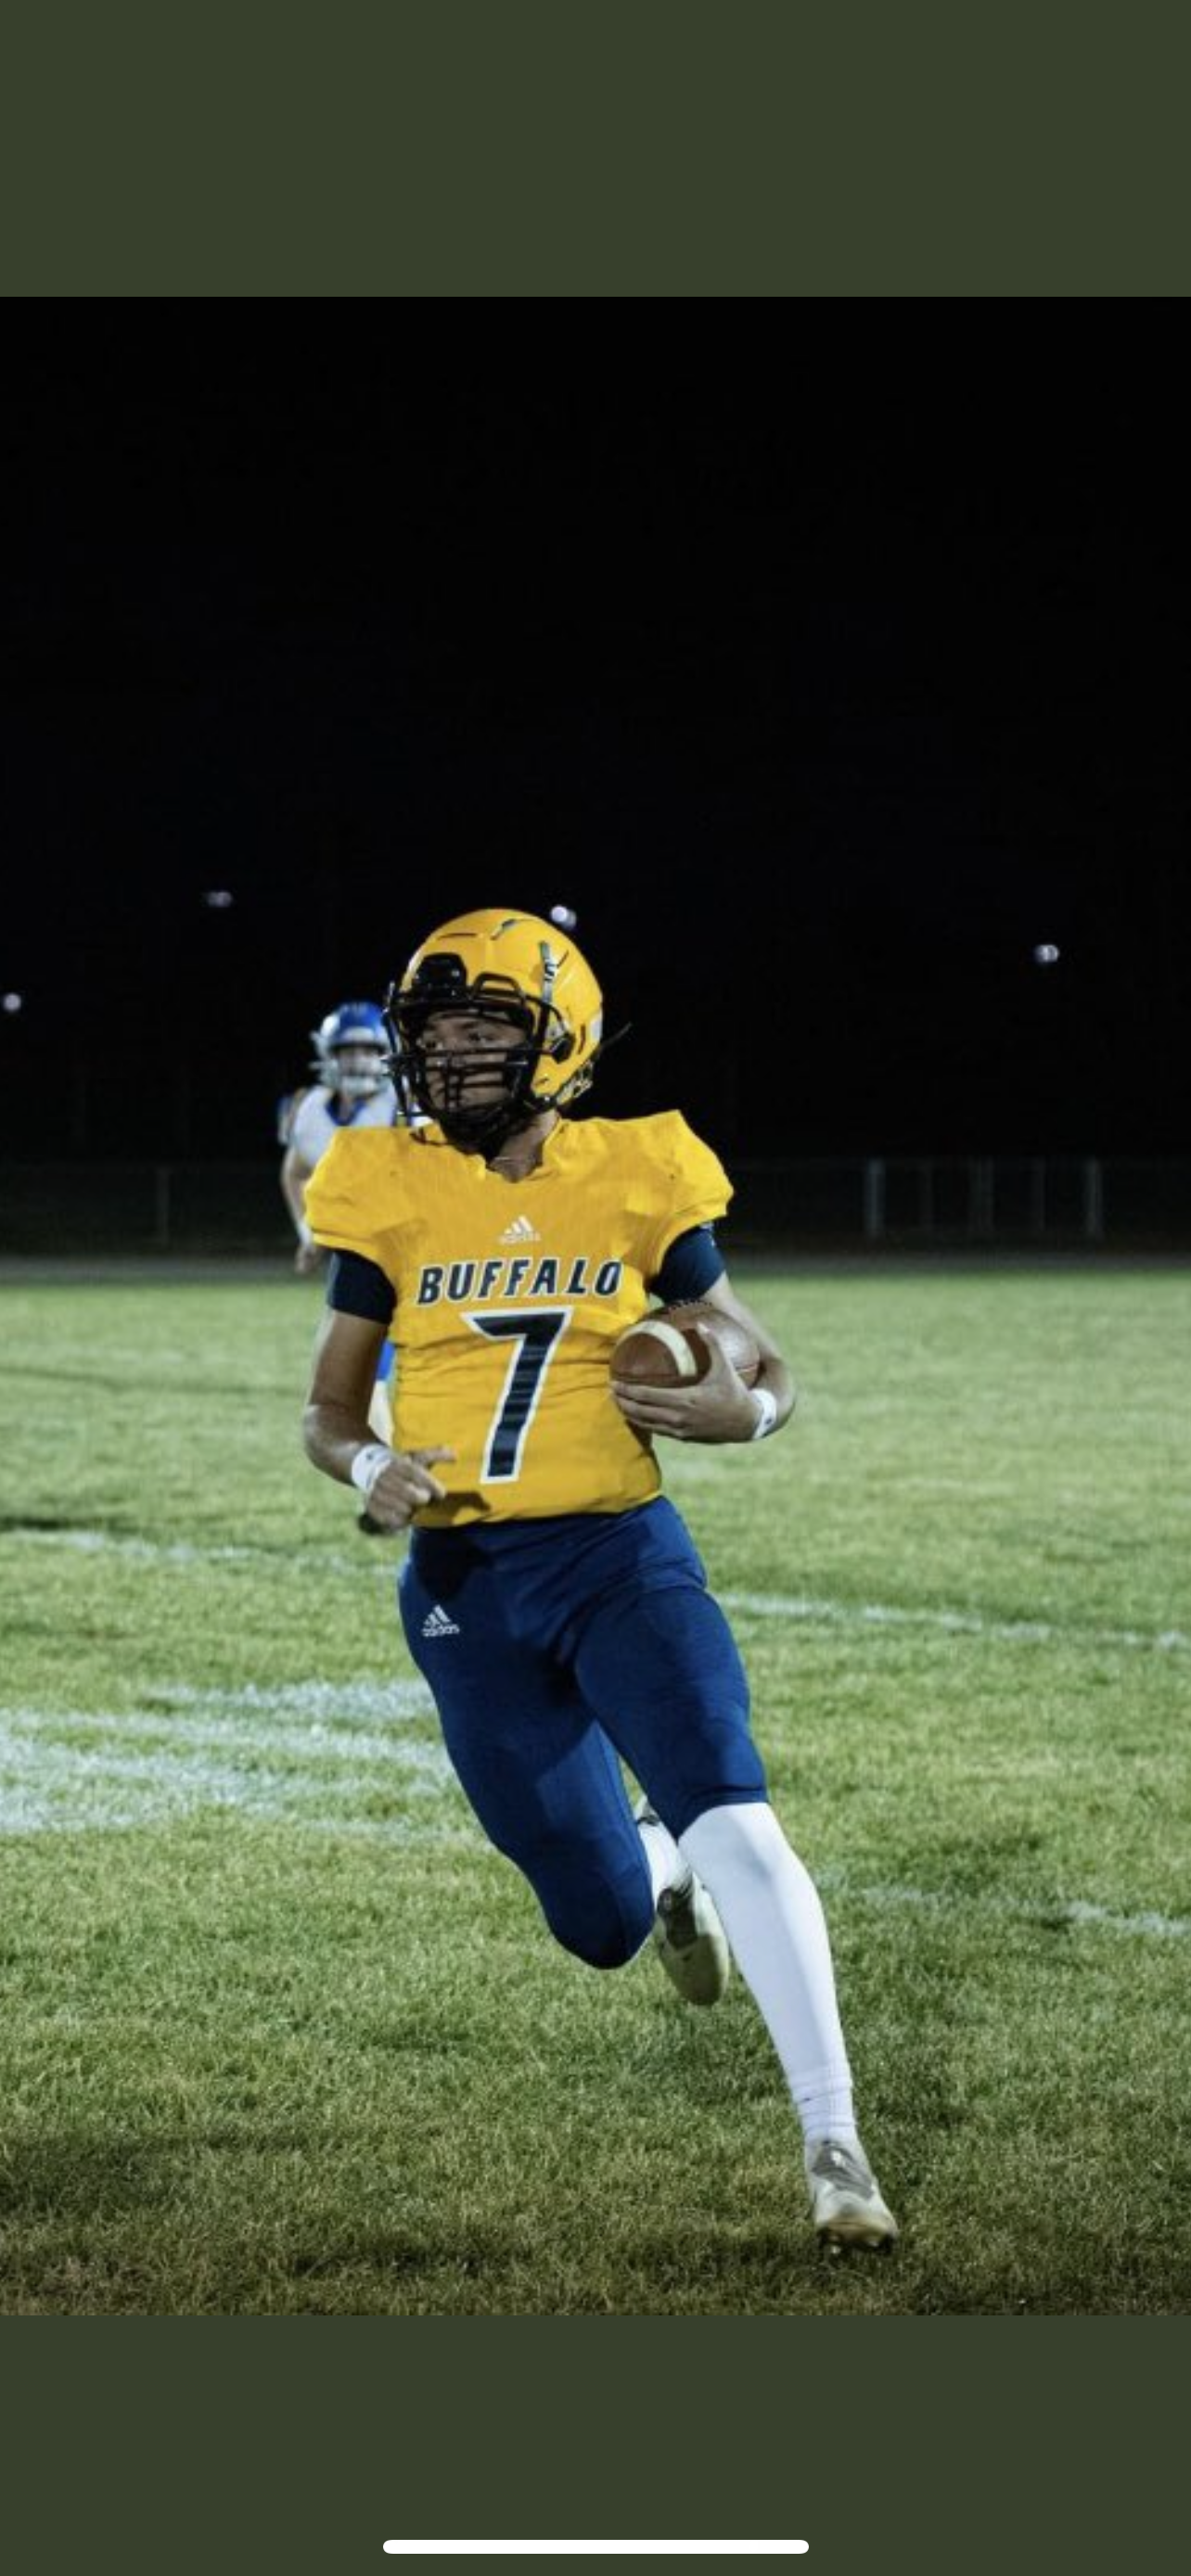 <span class="pn-tooltip pn-player-link">
        <span class="name-pointer">2024 & 2025 West Virginia Quarterback Preview</span>
        <span class="info-box not-prose" style="background: linear-gradient(to bottom, rgba(193,25,32, 0.95) 0%,rgba(193,25,32, 1) 100%)">
            <a href="https://prepredzone.com/2023/03/2024-2025-west-virginia-quarterback-preview/" class="link-wrap">
                                    <span class="player-img"><img src="https://prepredzone.com/wp-content/uploads/sites/3/2023/03/RobertShockey2.png?w=150&h=150&crop=1" alt="2024 & 2025 West Virginia Quarterback Preview"></span>
                
                <span class="player-details">
                    <span class="first-name">2024</span>
                    <span class="last-name">& 2025 West Virginia Quarterback Preview</span>
                    <span class="measurables">
                                            </span>
                                    </span>
                <span class="player-rank">
                                                        </span>
                                    <span class="state-abbr"></span>
                            </a>

            
        </span>
    </span>
